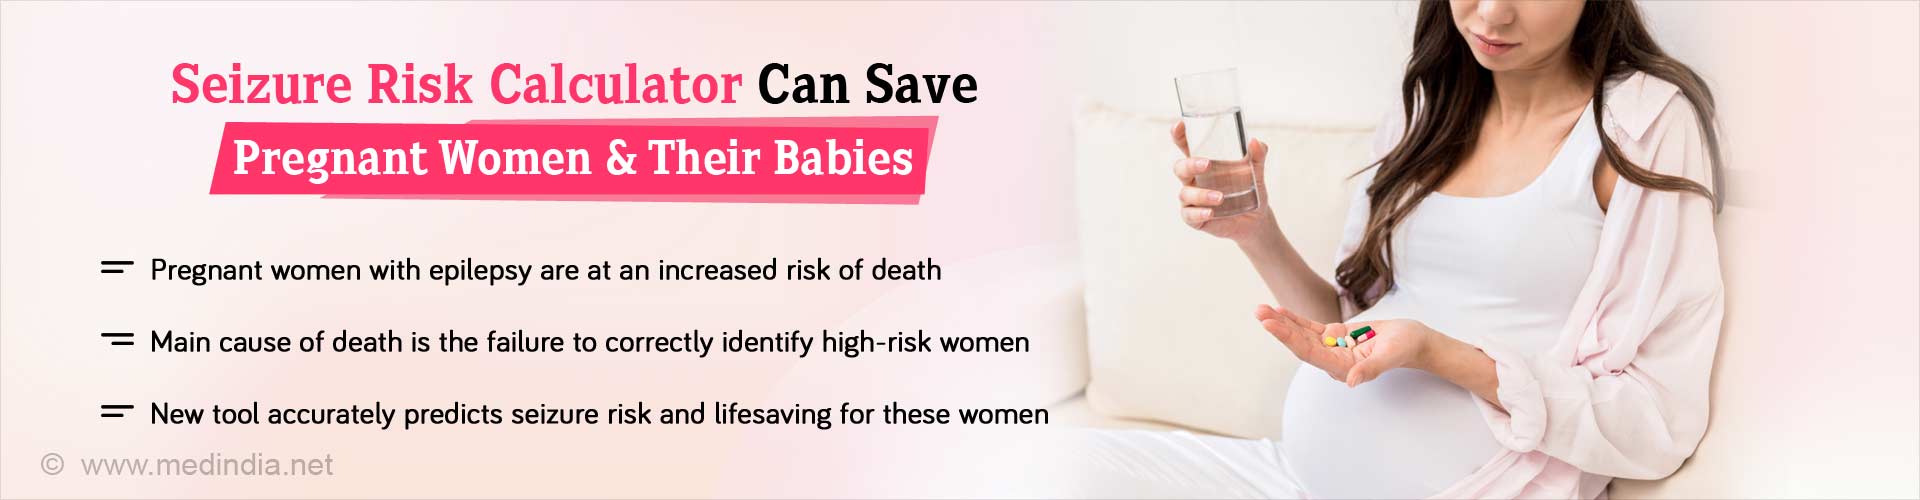 Seizure risk calculator can save pregnant women and their babies. Pregnant women with epilepsy are at an increased risk of death. Main cause of death is the failure to correctly identify high-risk women. New tool accurately predicts seizure risk and lifesaving for these women.